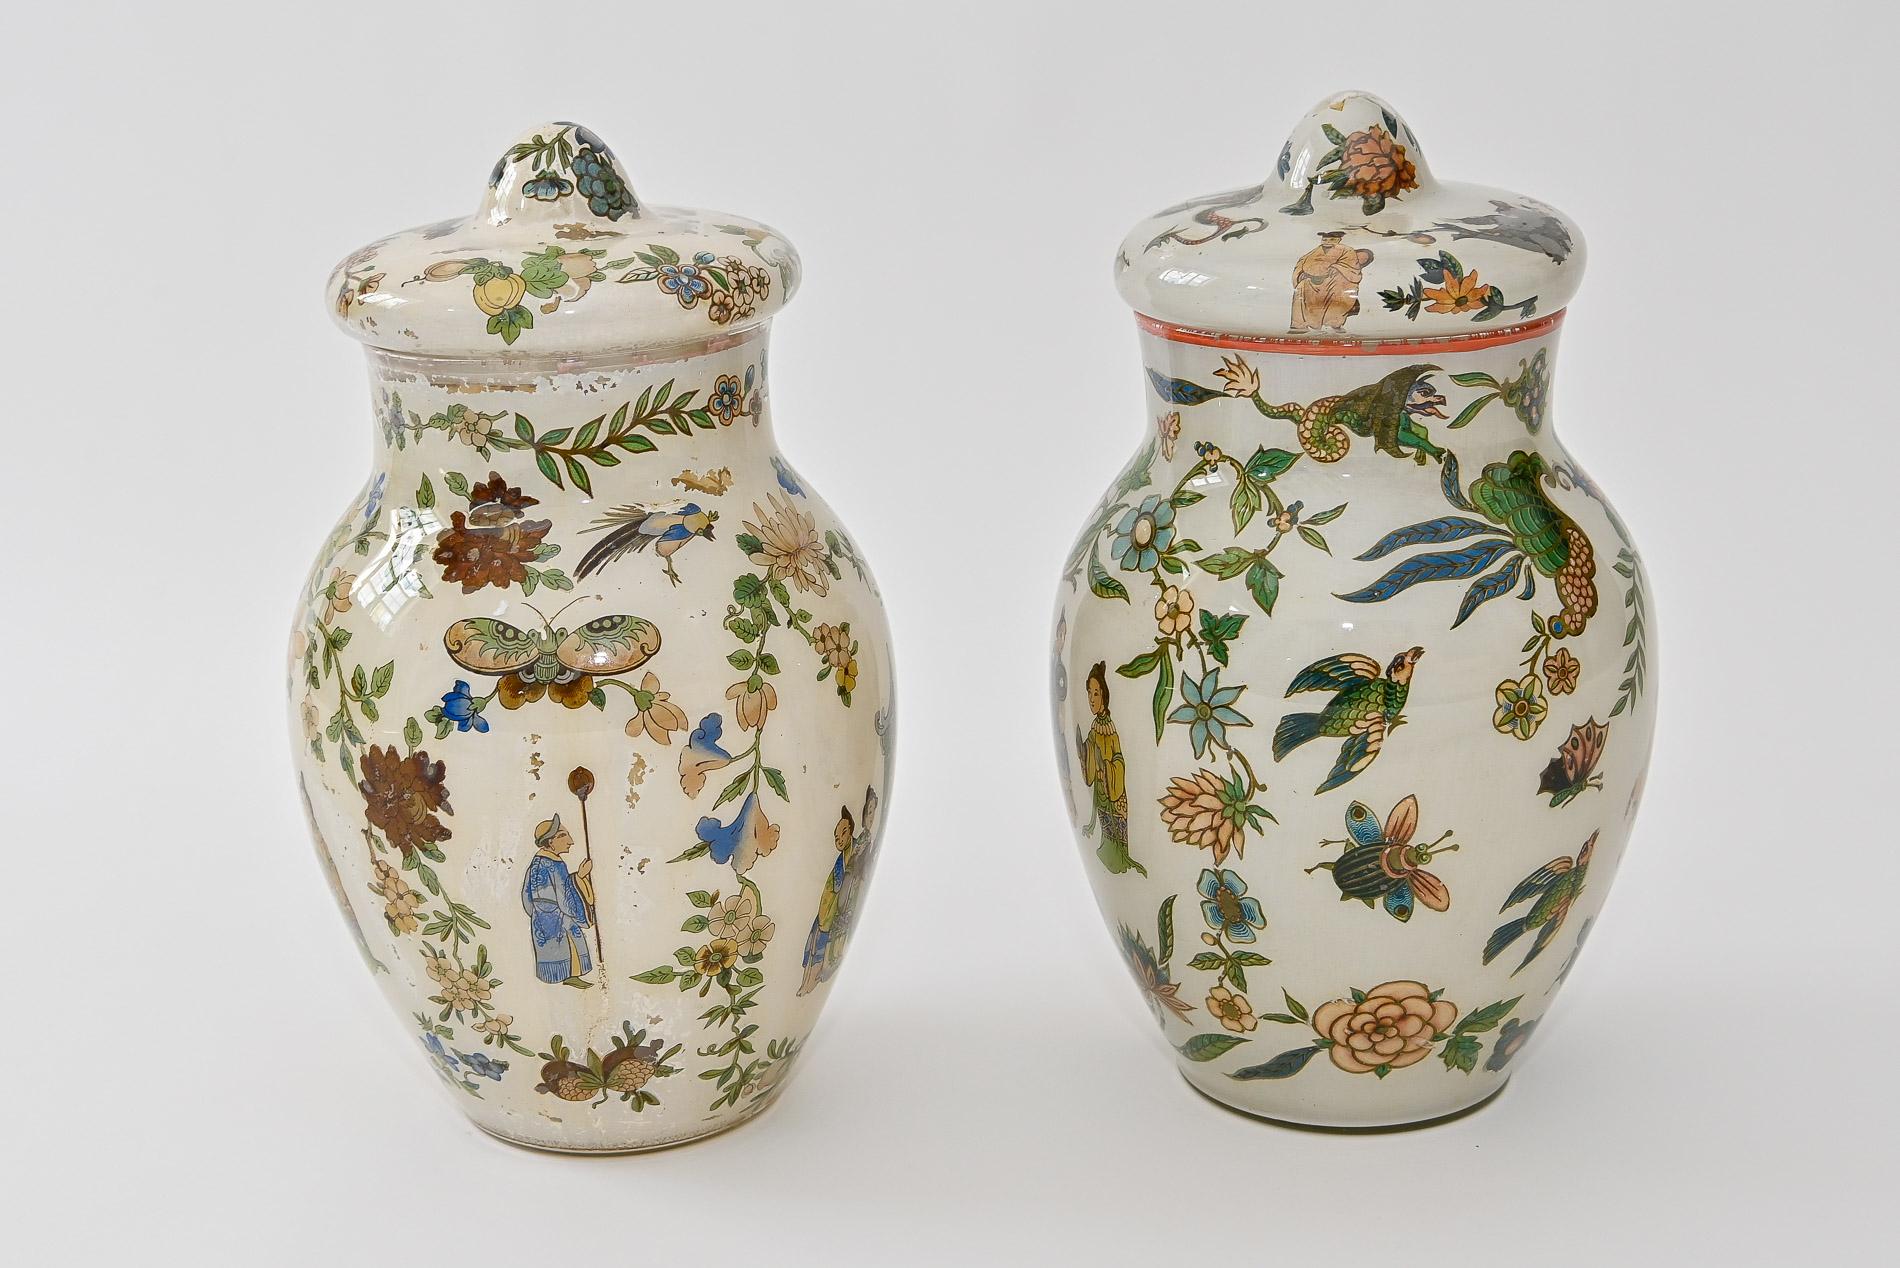 18th century pair of Decalcomania Glass vases Piemonte Italy Arte Povera
A rare pair lidded vases from Piemonte Italy 18th century.
Painted in polychrome with applications in Arte Povera with floral and chinois motifs.
The charisma that spreads